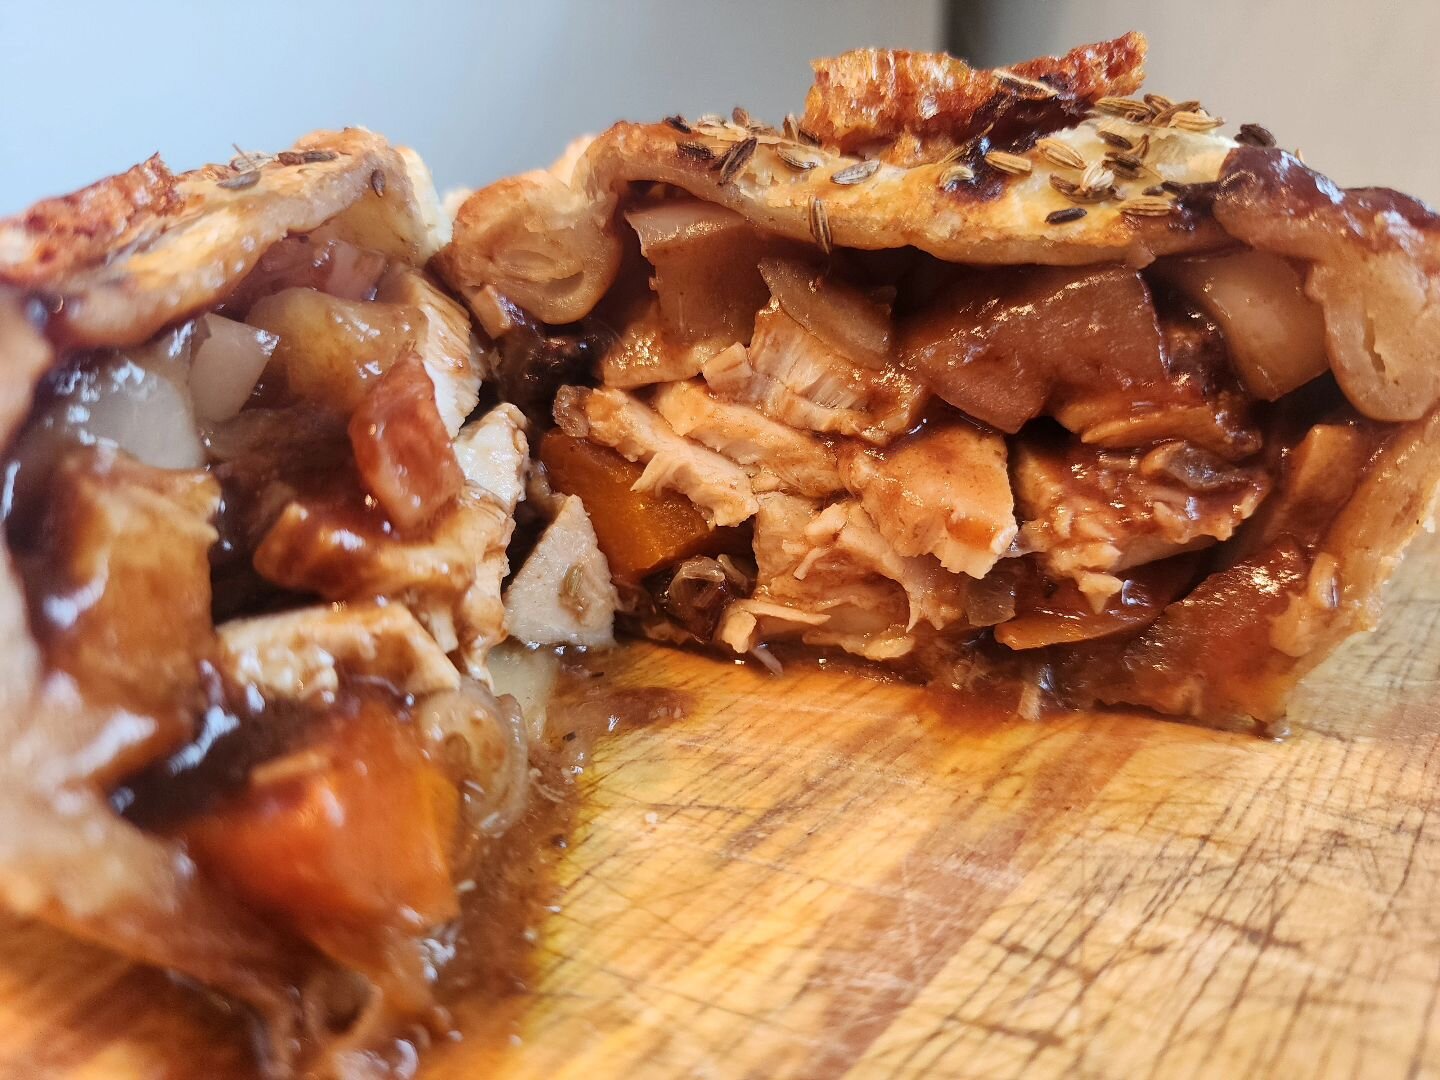 We're working our winter pie flavors for the shop. Would you be keen on this......

Pork belly roast with apple sauce in a pie?
Does it work?
.
.
.
.
.
.YES!